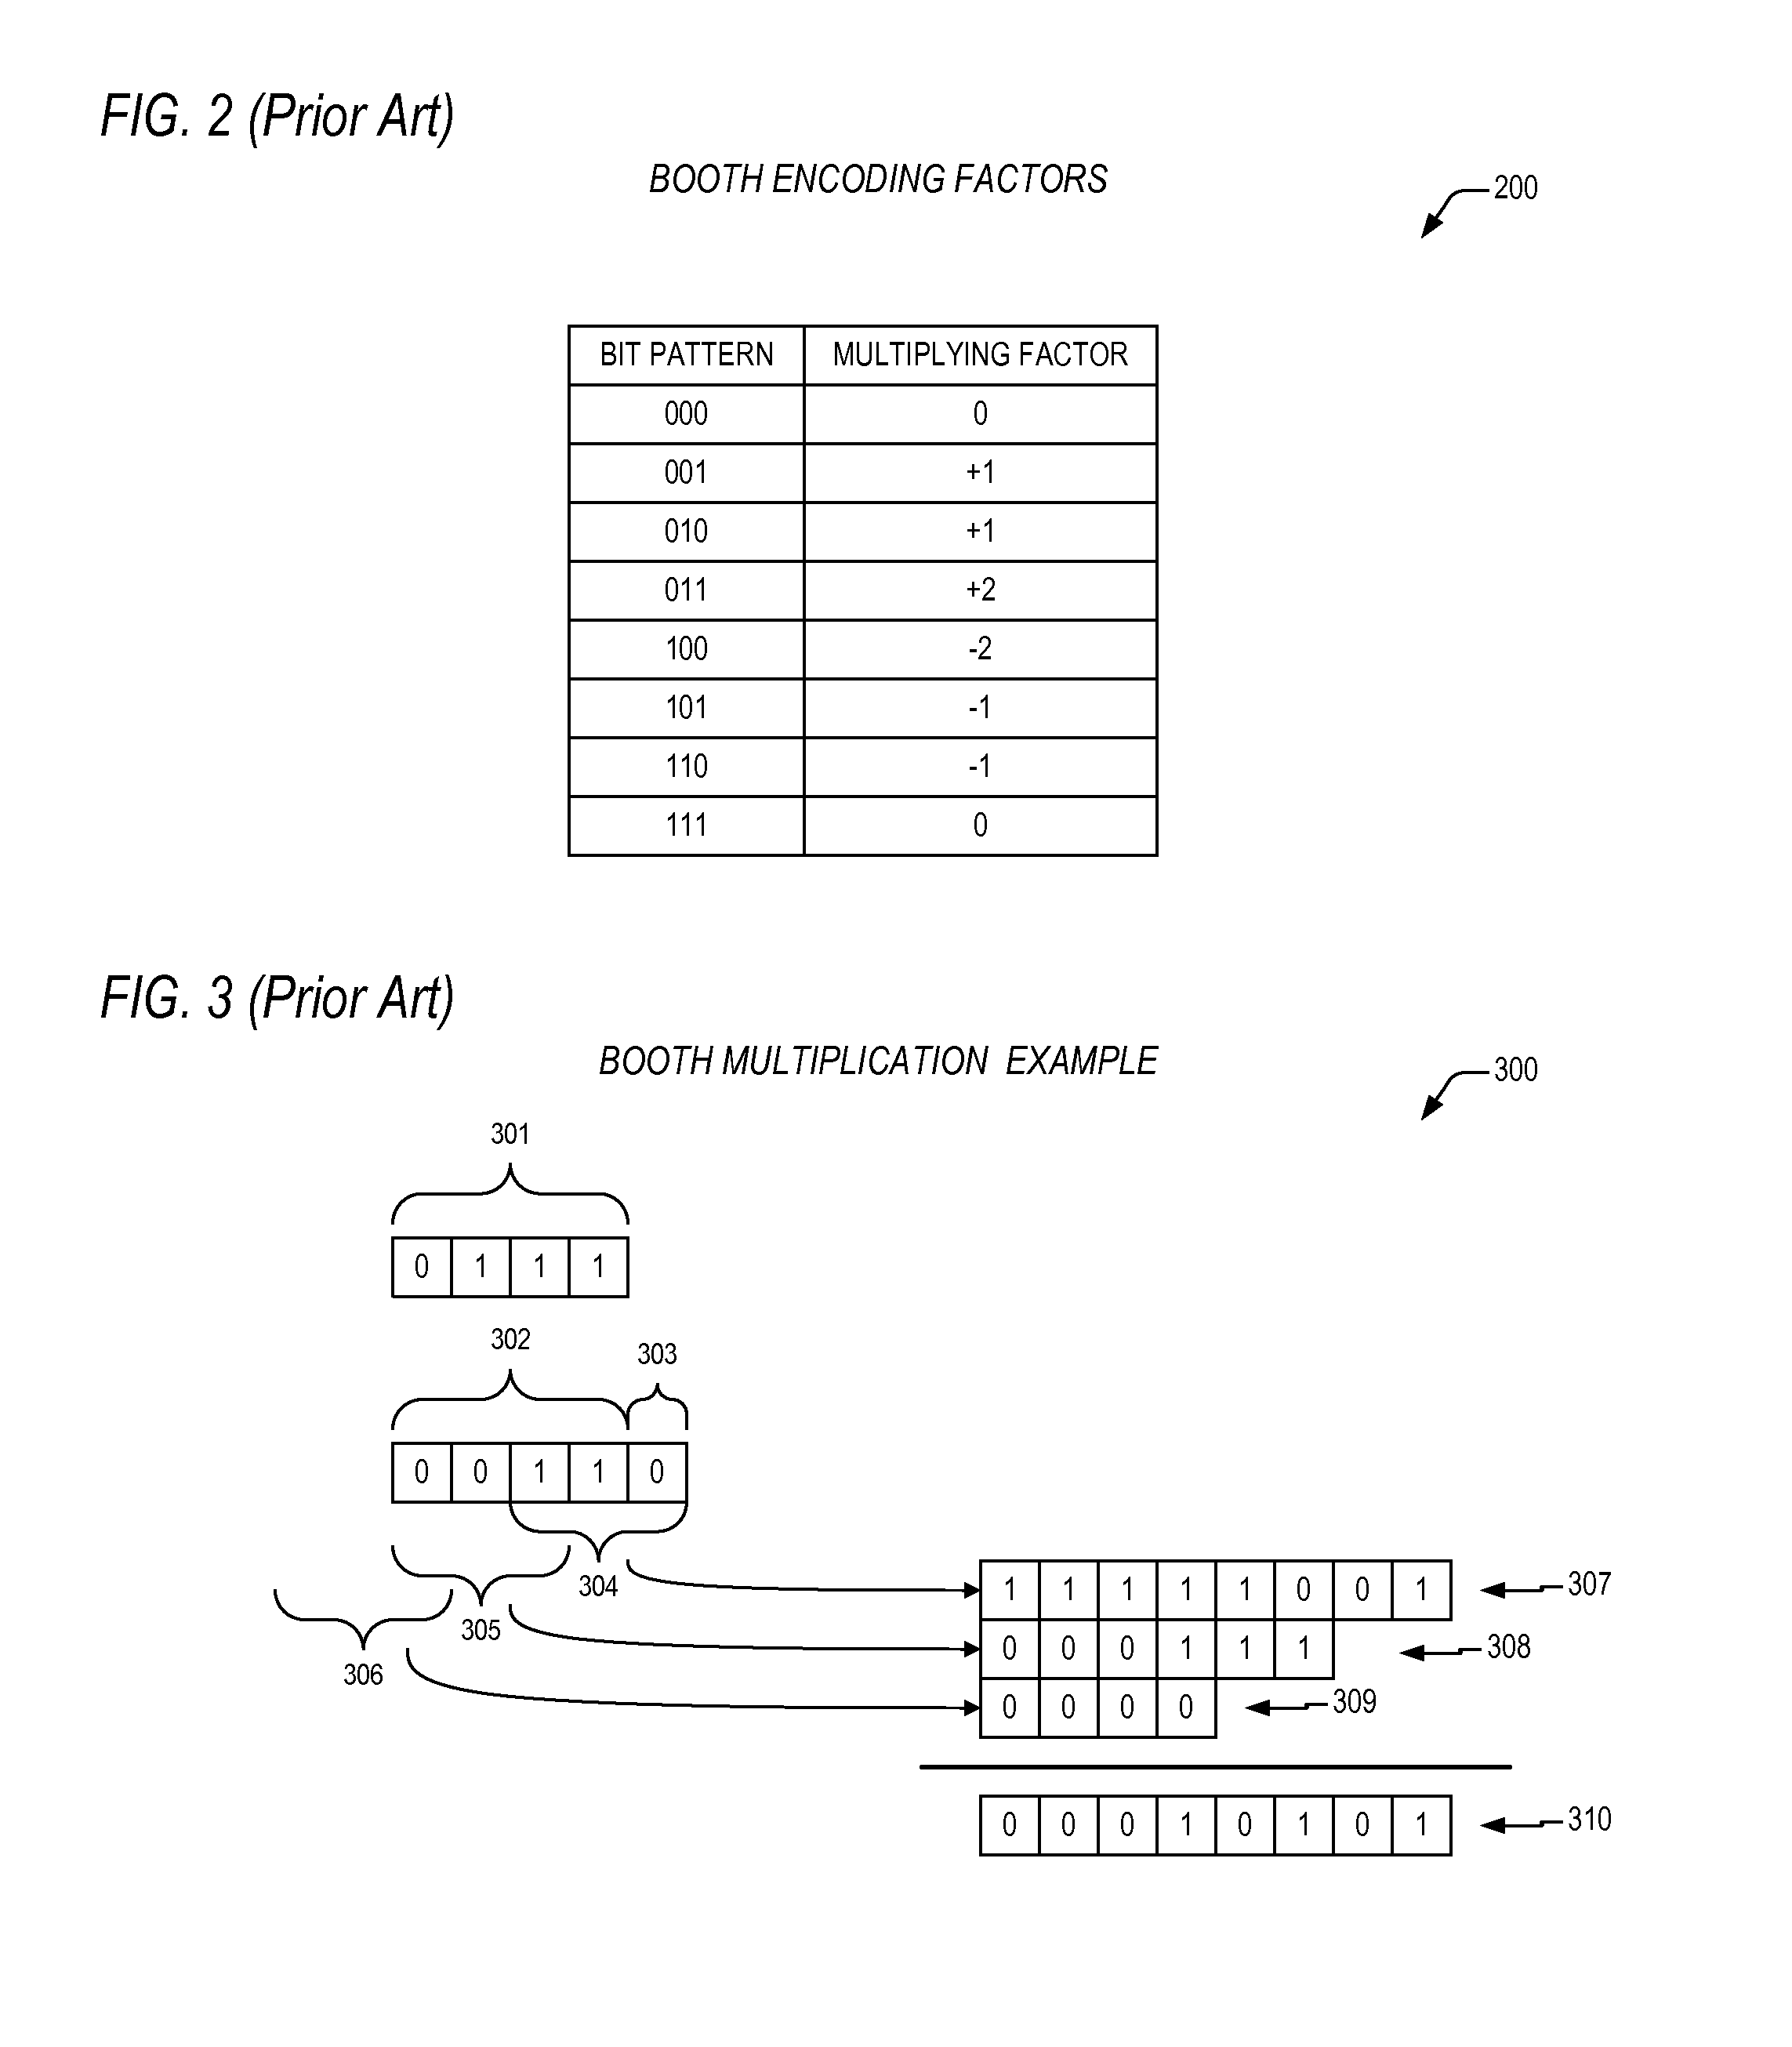 Mechanism for carryless multiplication that employs booth encoding